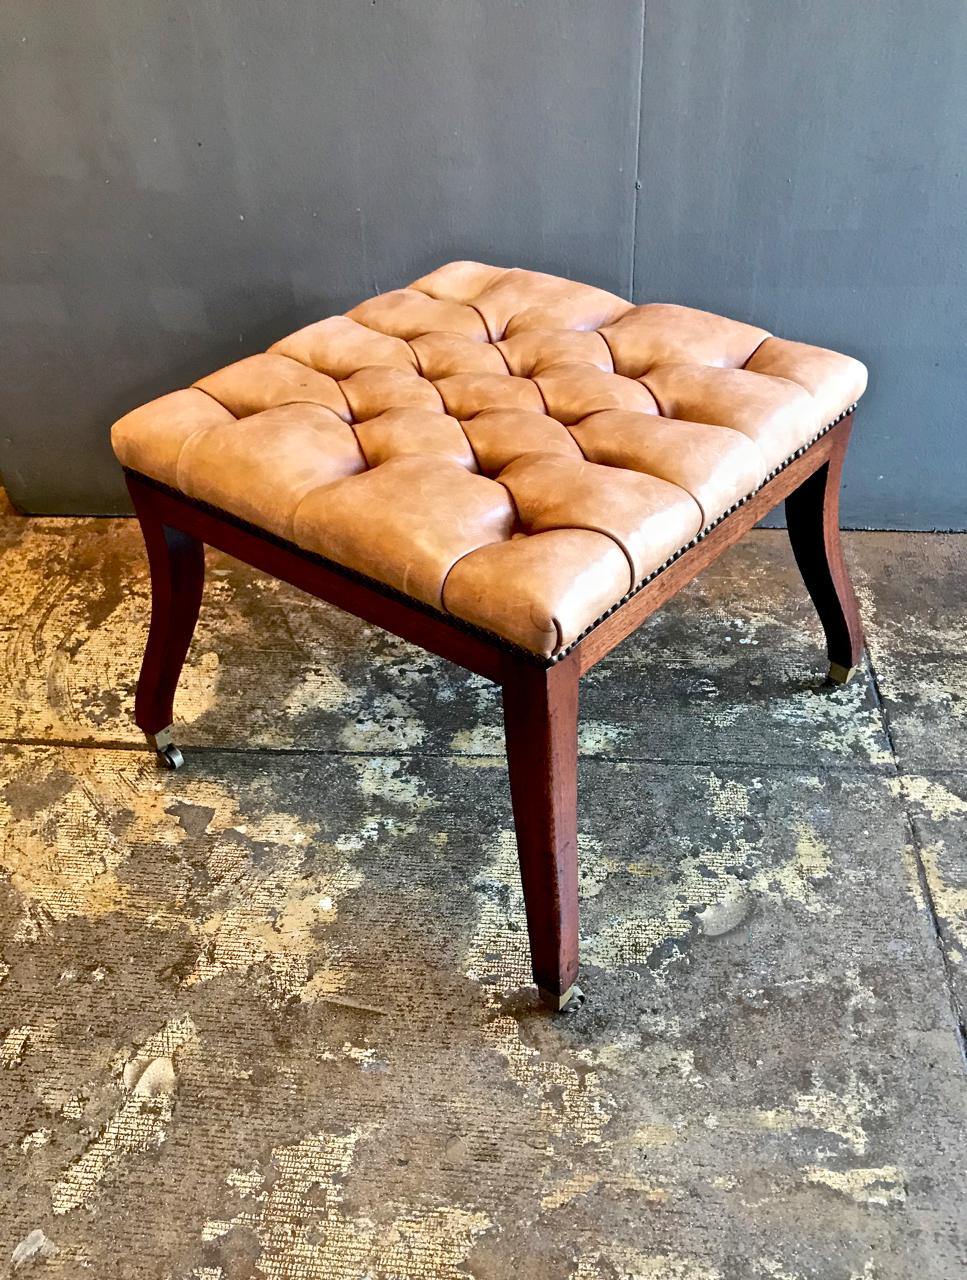 This is an unusual Regency-style tufted leather bench. The elegant legs are out-swept ending in small casters in a high early 19th century form. The tufted leather has great natural patina.